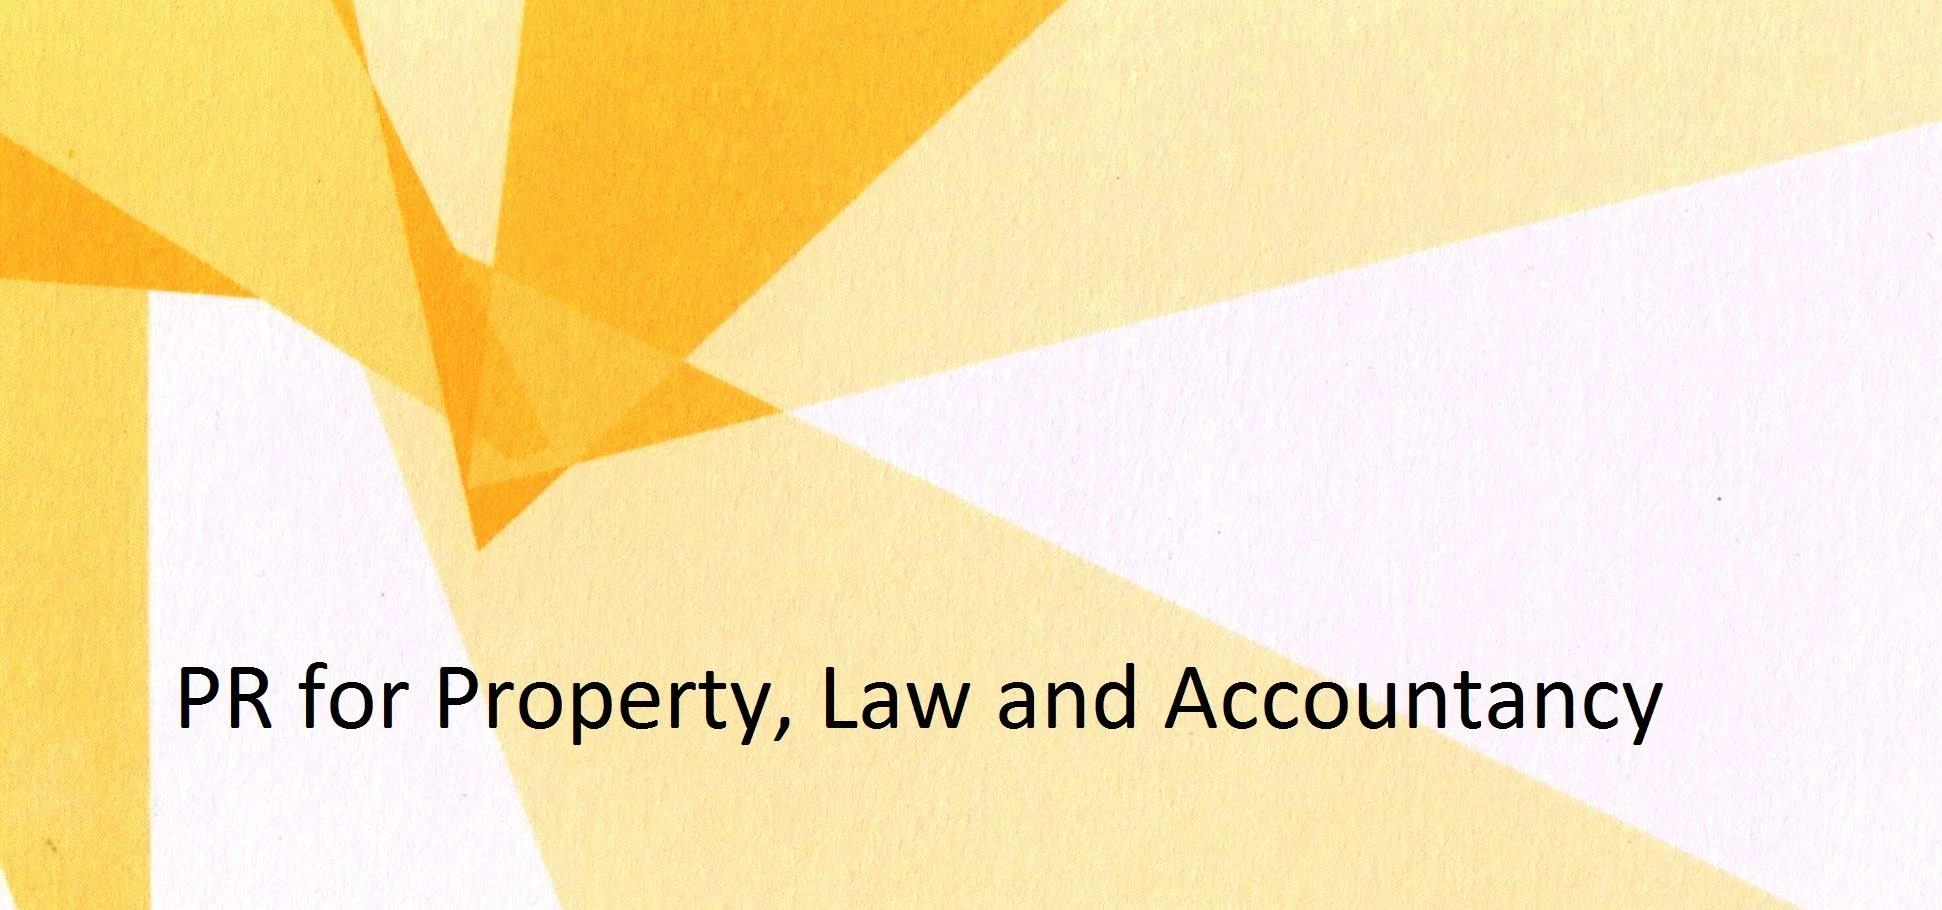 Reay Public Relations - PR for Property, Law and Accountancy